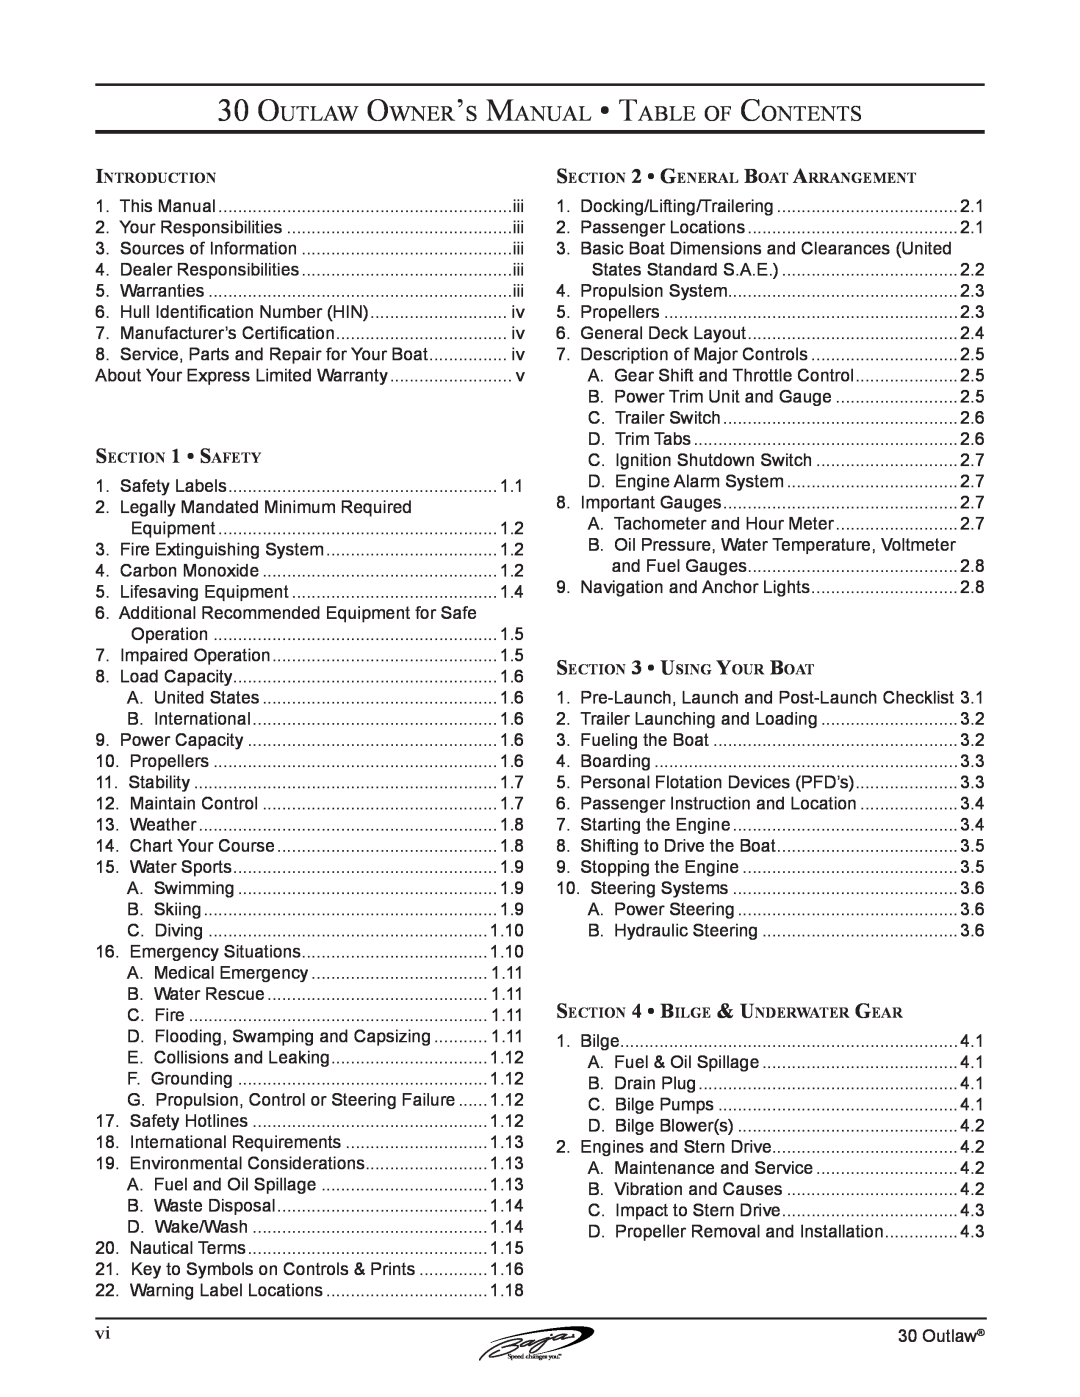 Baja Marine 30 Outlaw Owner’s Manual Table of Contents, Introduction, Safety, General Boat Arrangement, Using Your Boat 